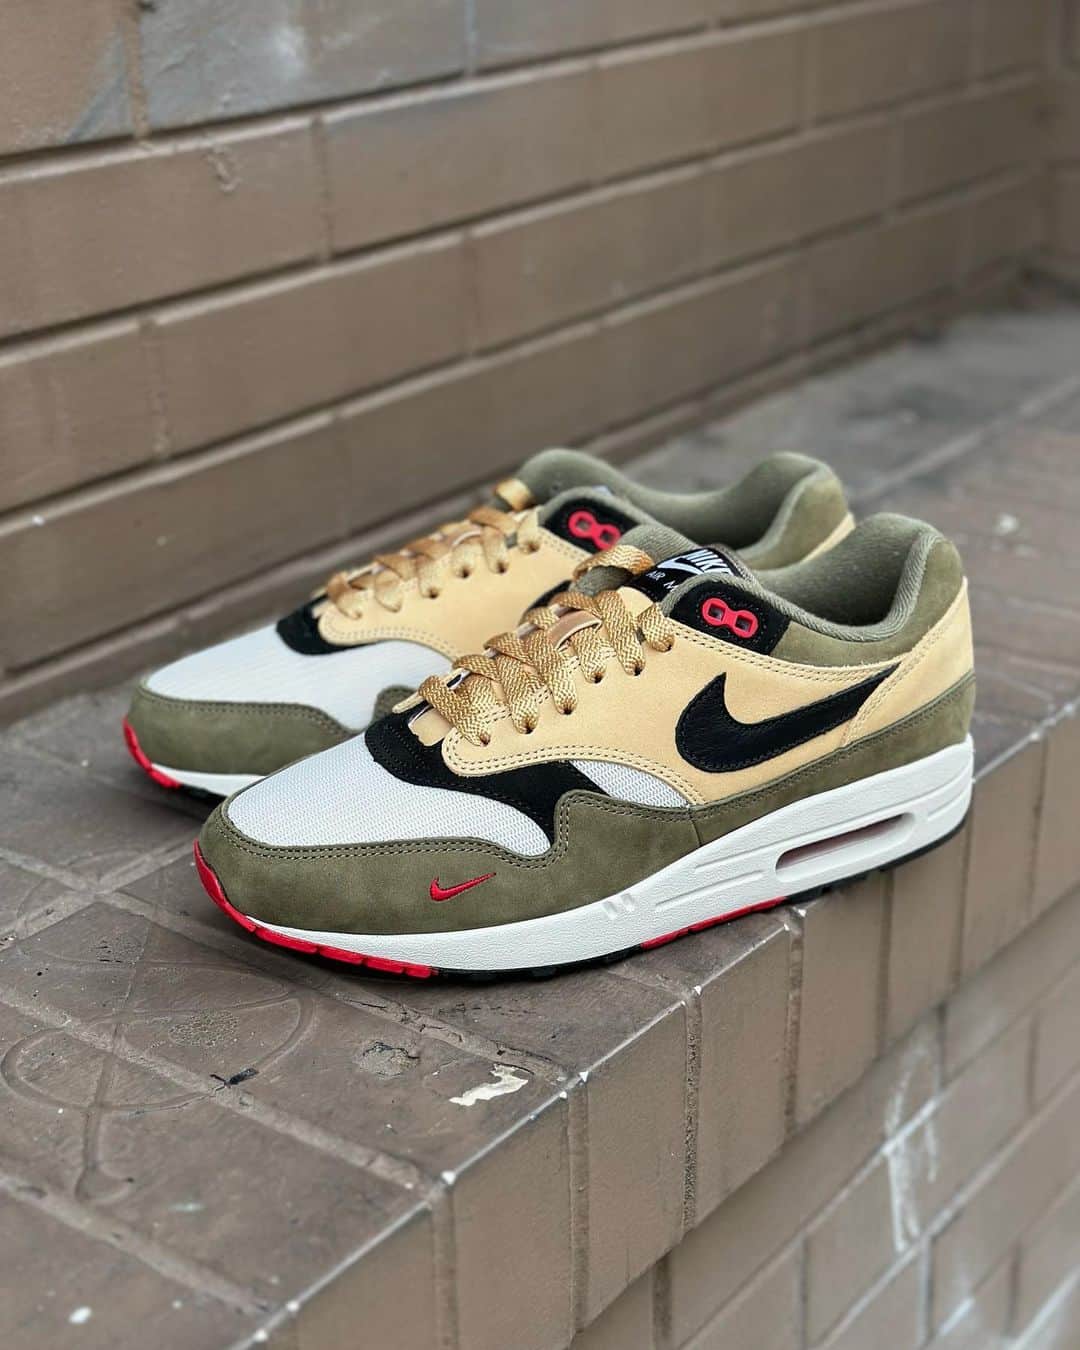 Mr. Tyのインスタグラム：「#newpickup #nikebyyou #airmax1 3 of 4. I was itching to use the olive nubuck in some capacity on an Air Max. Went with olive on the mudguard, sesame upper for some contrast, black leather swoosh with black nubuck accents, and I added red accents for a vibrant pop of color! No velvet lining this go around, didn’t want to interrupt the balance. Overall this pair ended up being pretty clean.  #am1 #ids #complexkicks #airmax kissmyairs #mynikeids #airmax87 #airmaxone #nikeid #complexkicks #ijustlikeshoes #theshoegame #airmaxalways #mynikeid #crepecity #ファッション #コーティネート」